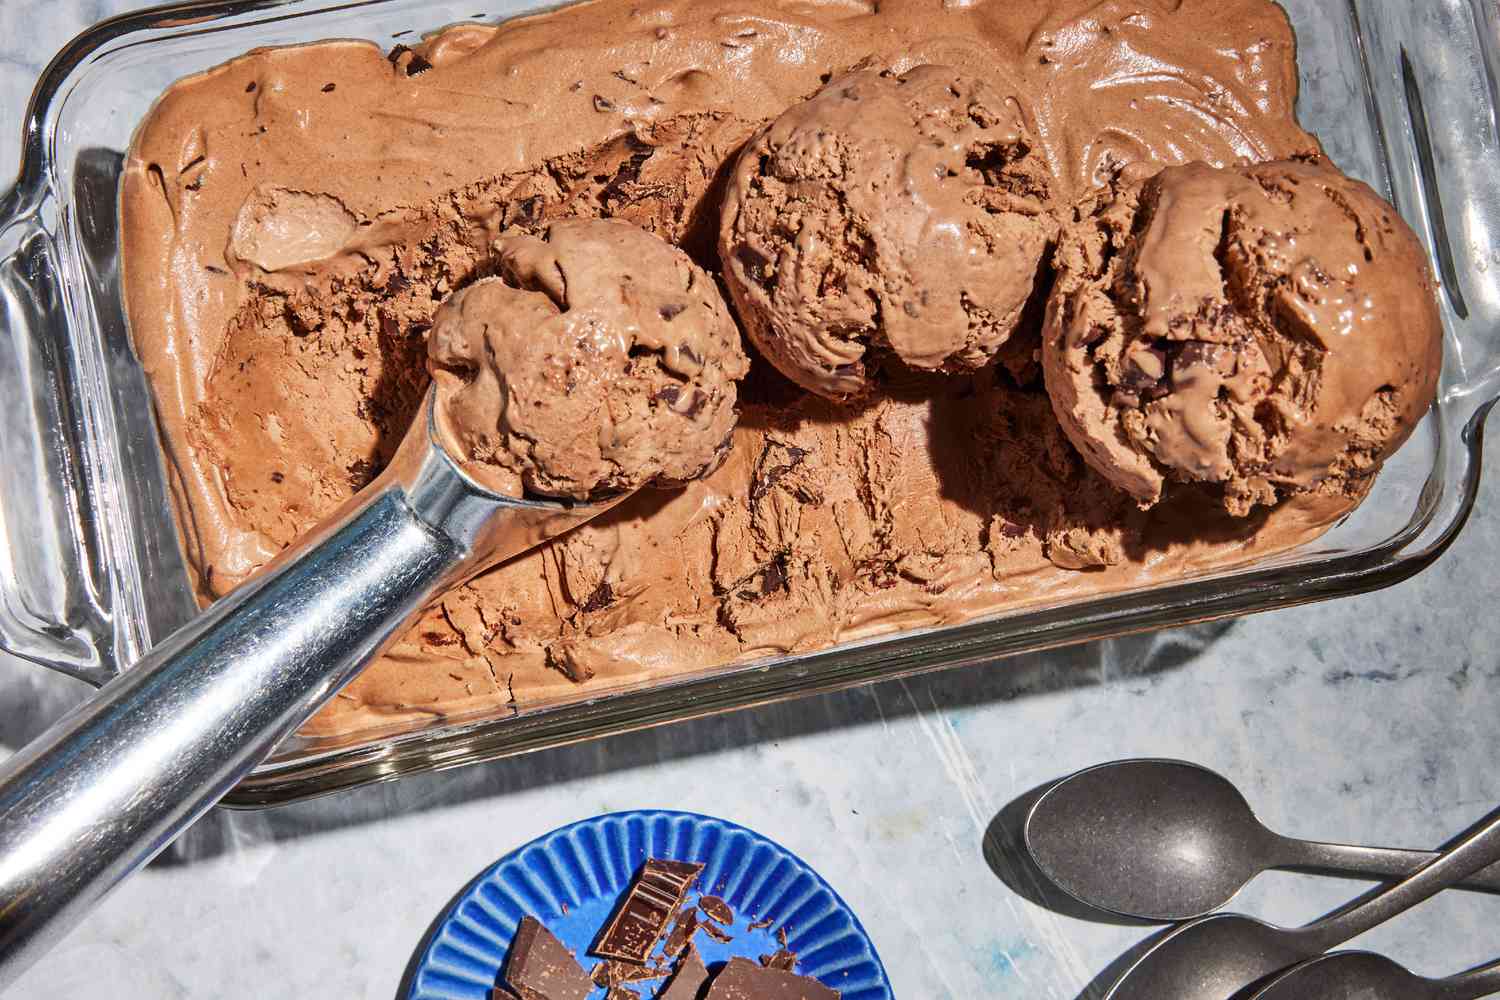 How To Make Chocolate Froyo With Ice Cream Maker